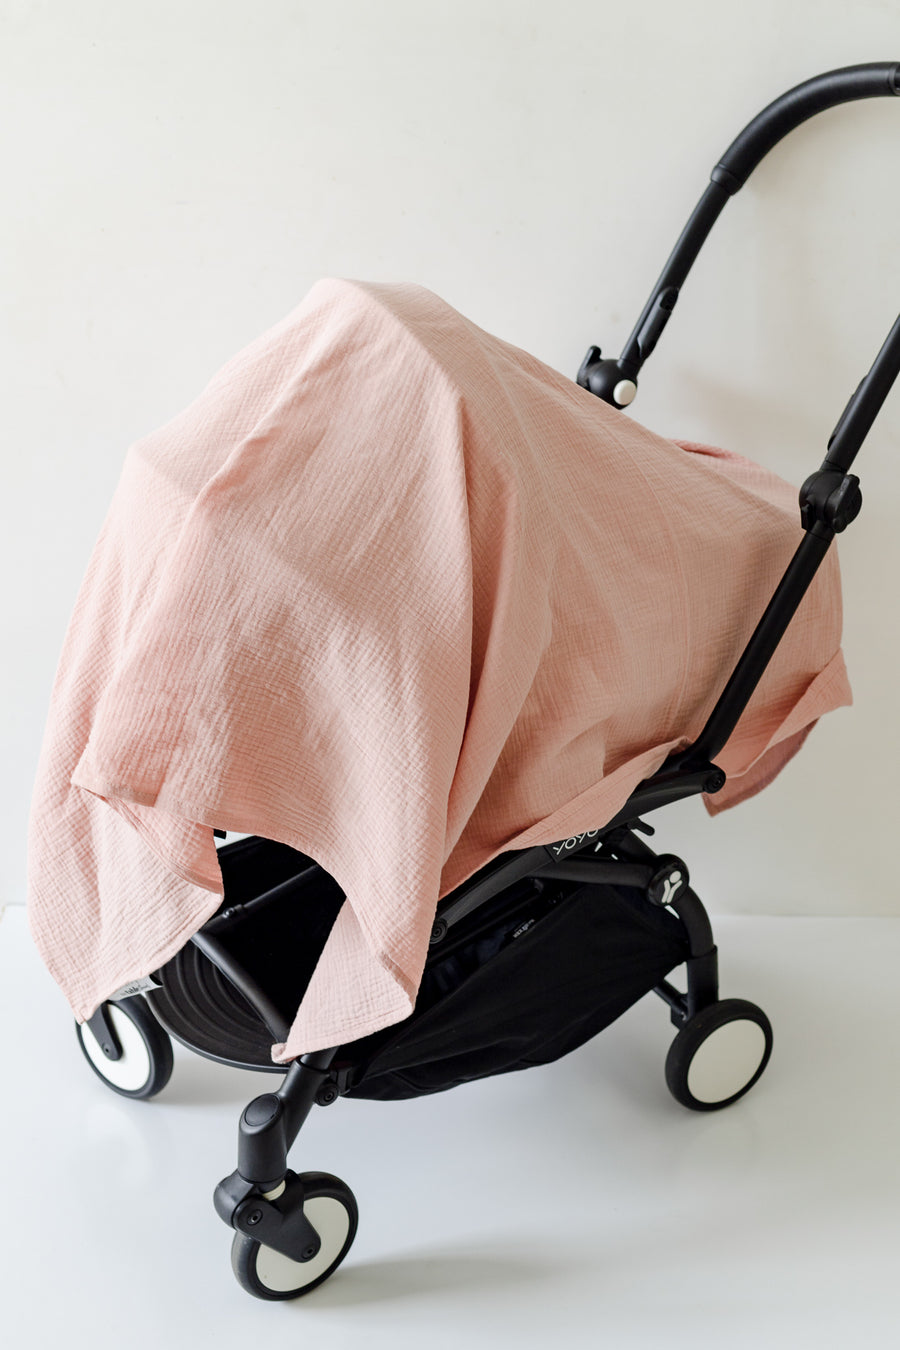 soft pink muslin baby swaddle